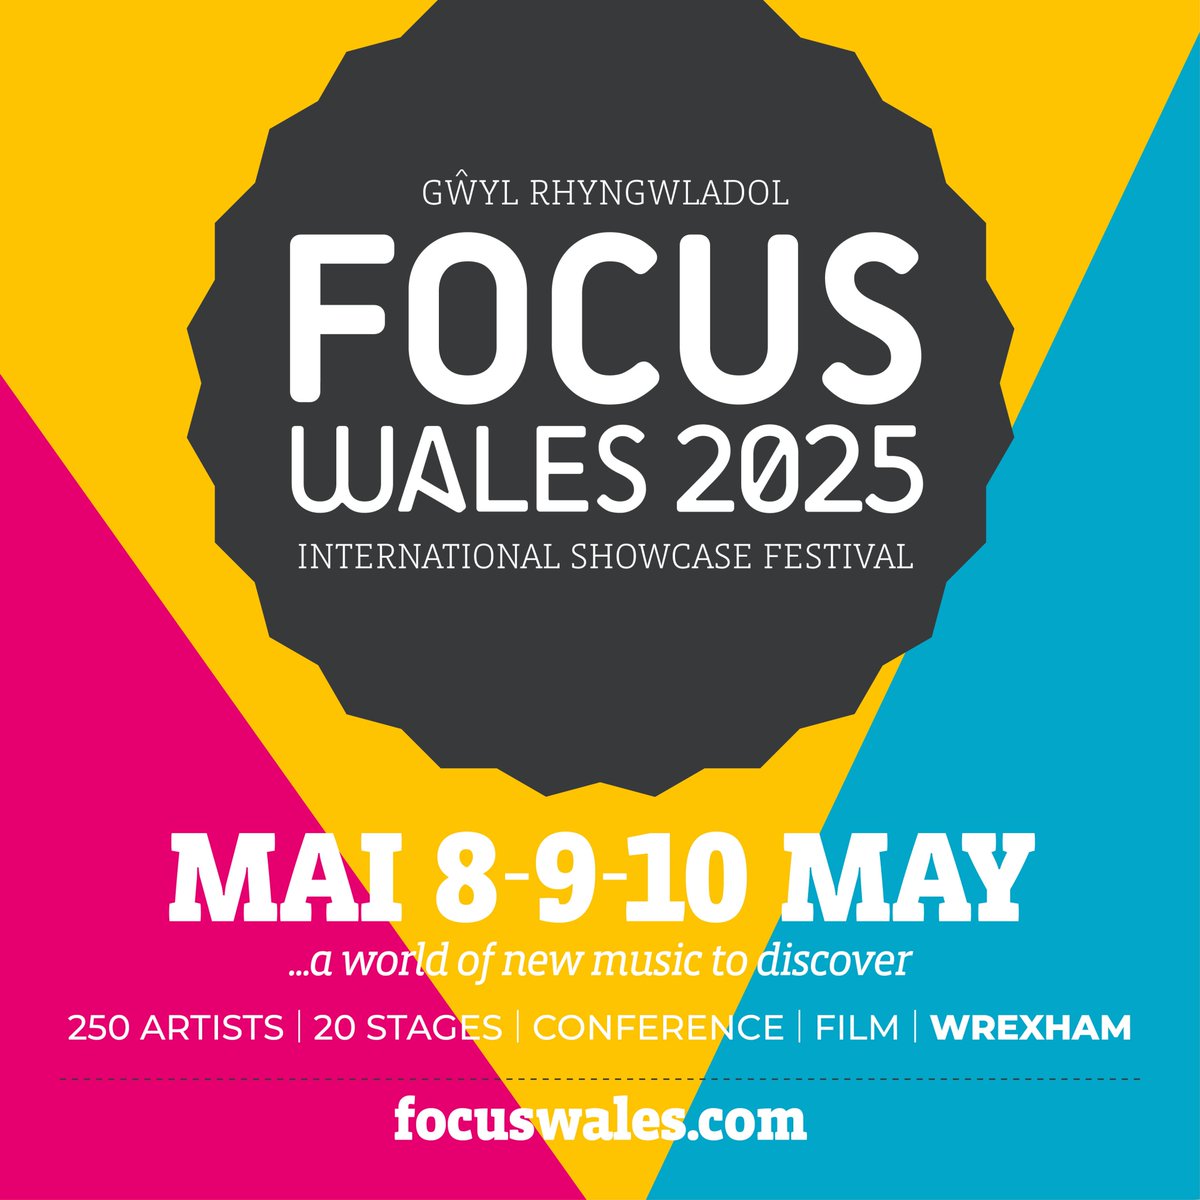 Diolch pawb : Thanks everyone for making FOCUS Wales 2024 so special! 🎪 FOCUS Wales 2025 will mark our 15th year, and will take place in #Wrexham over 8th-10th May 2025! Super Early Bird tickets now on sale at focuswales.com 🍭